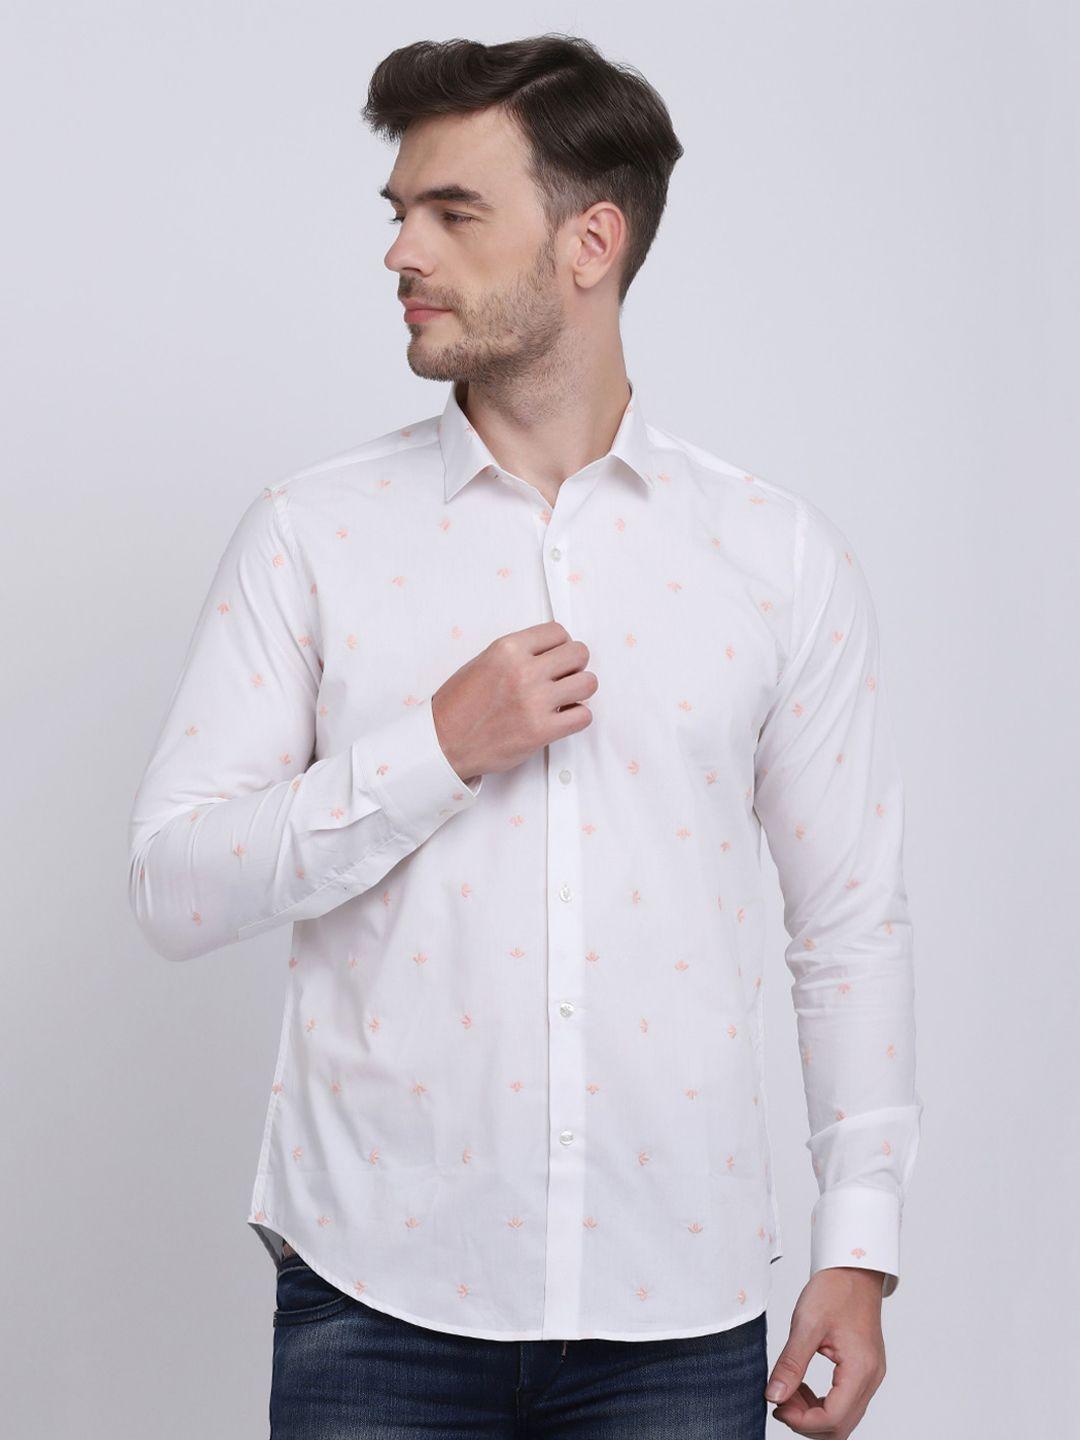 jjaagg-t-men-white-classic-printed-pure-cotton-casual-shirt